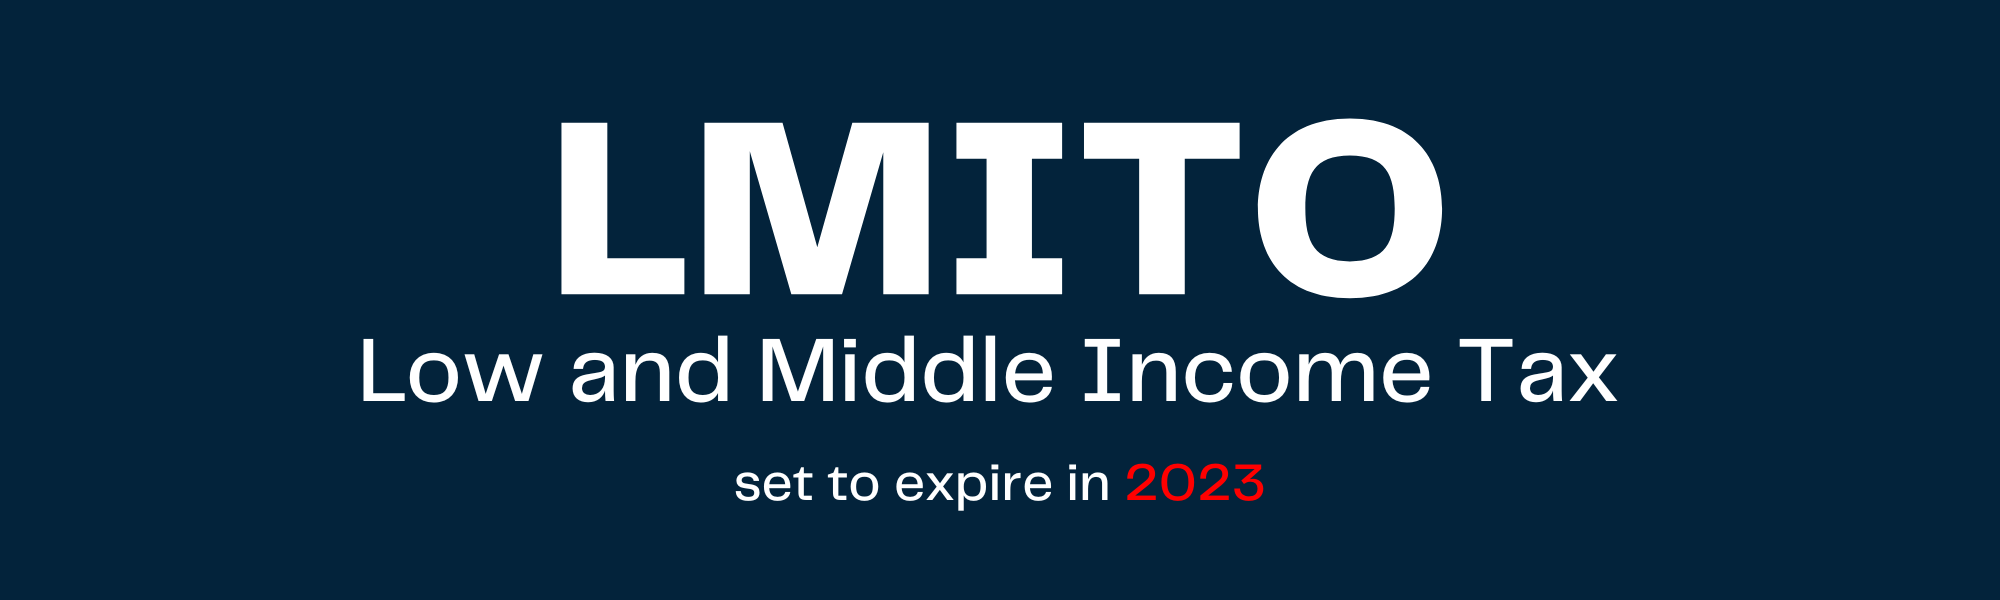 australia-s-low-and-middle-income-tax-offset-lmito-set-to-expire-in-2023